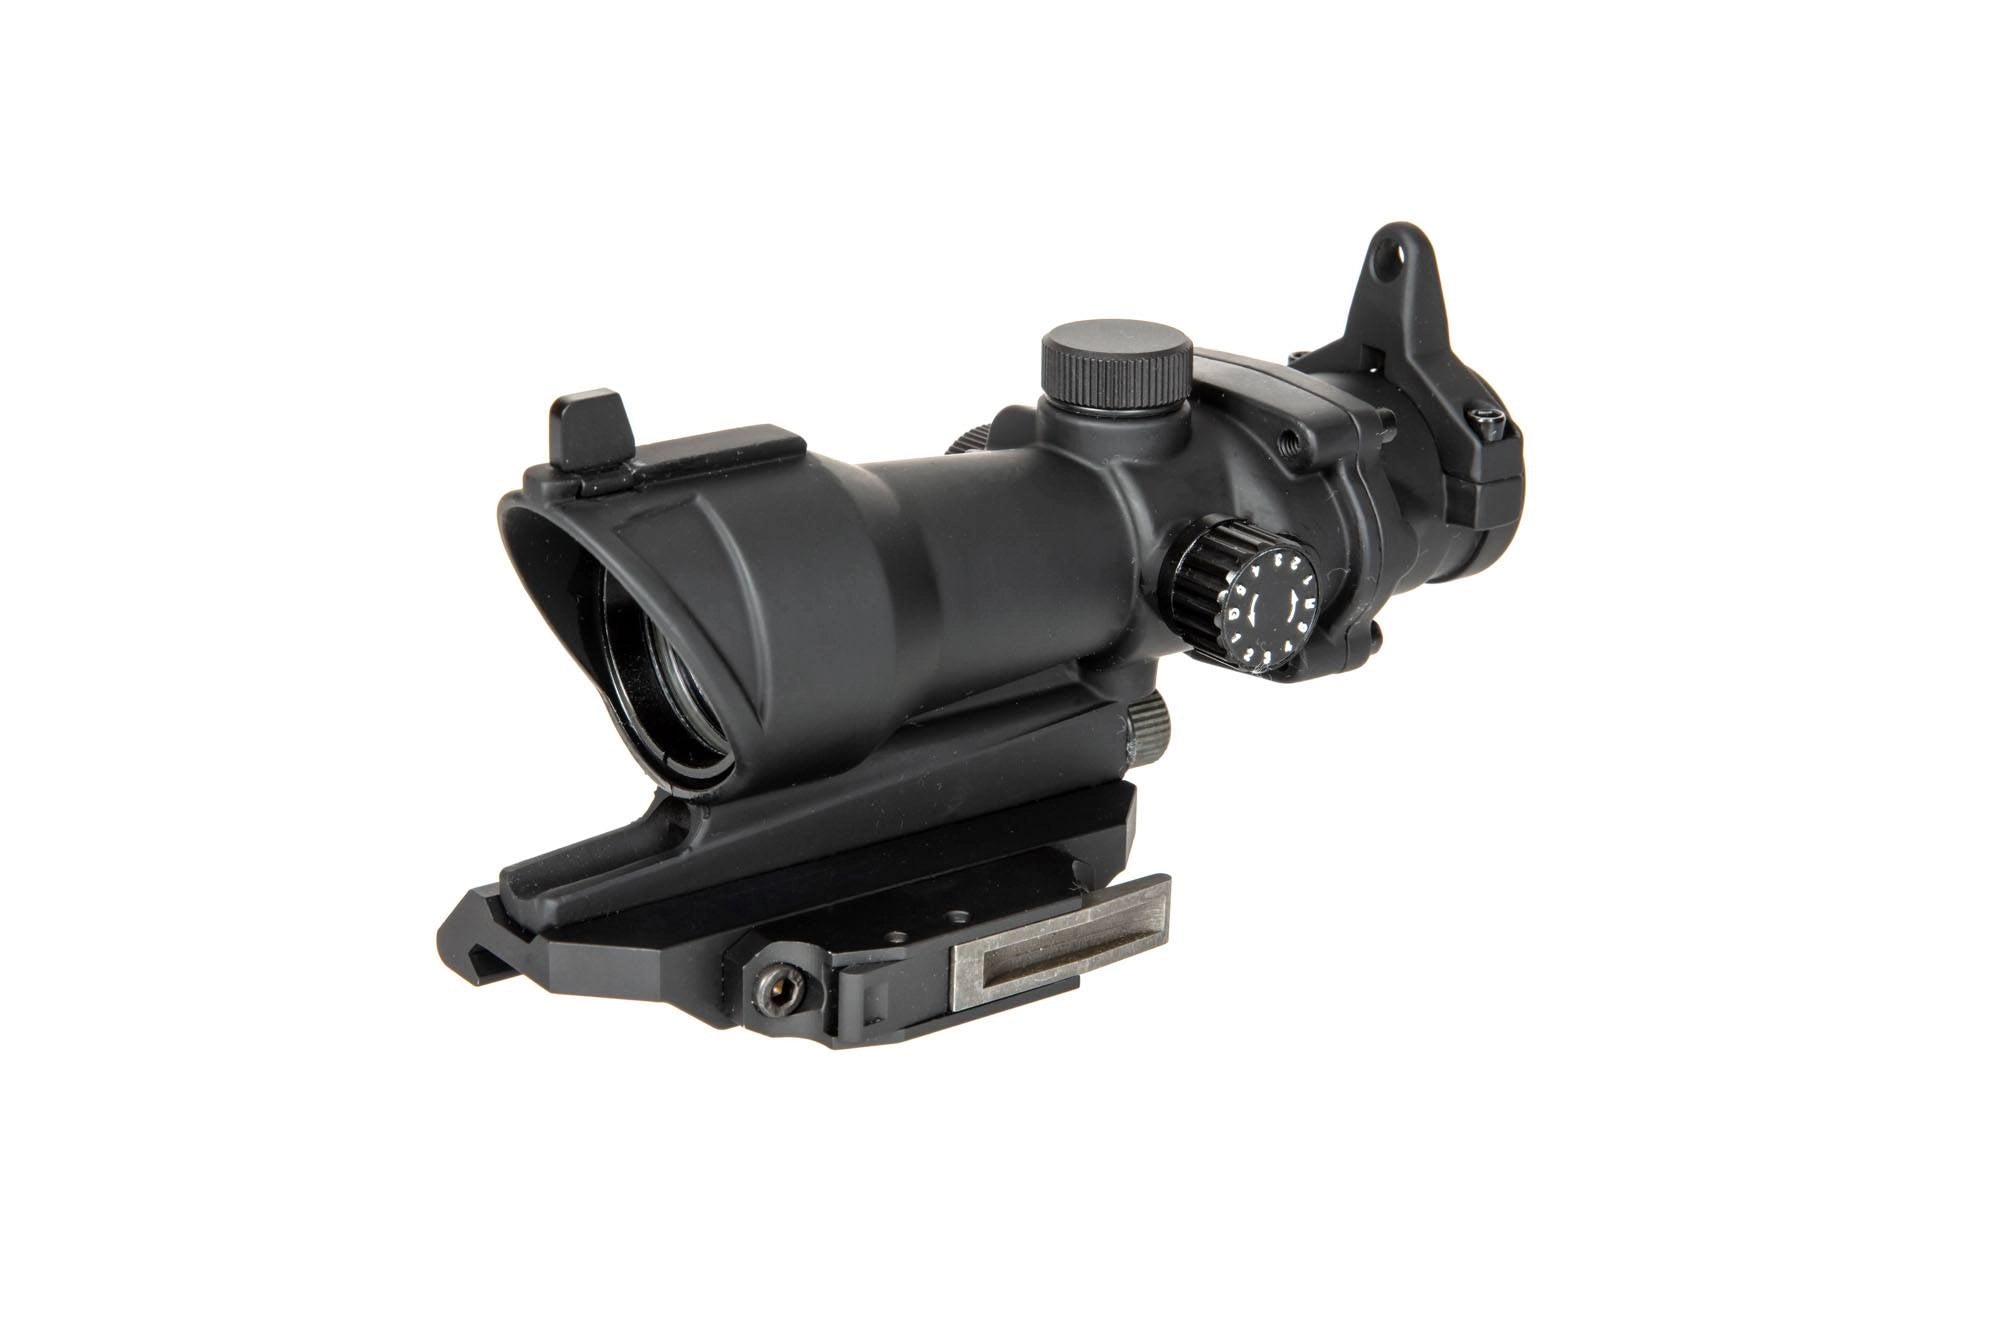 ACOG Style 4x32 Scope Replica with Killflash Cover, Lighting and QD V2 Mount - Black